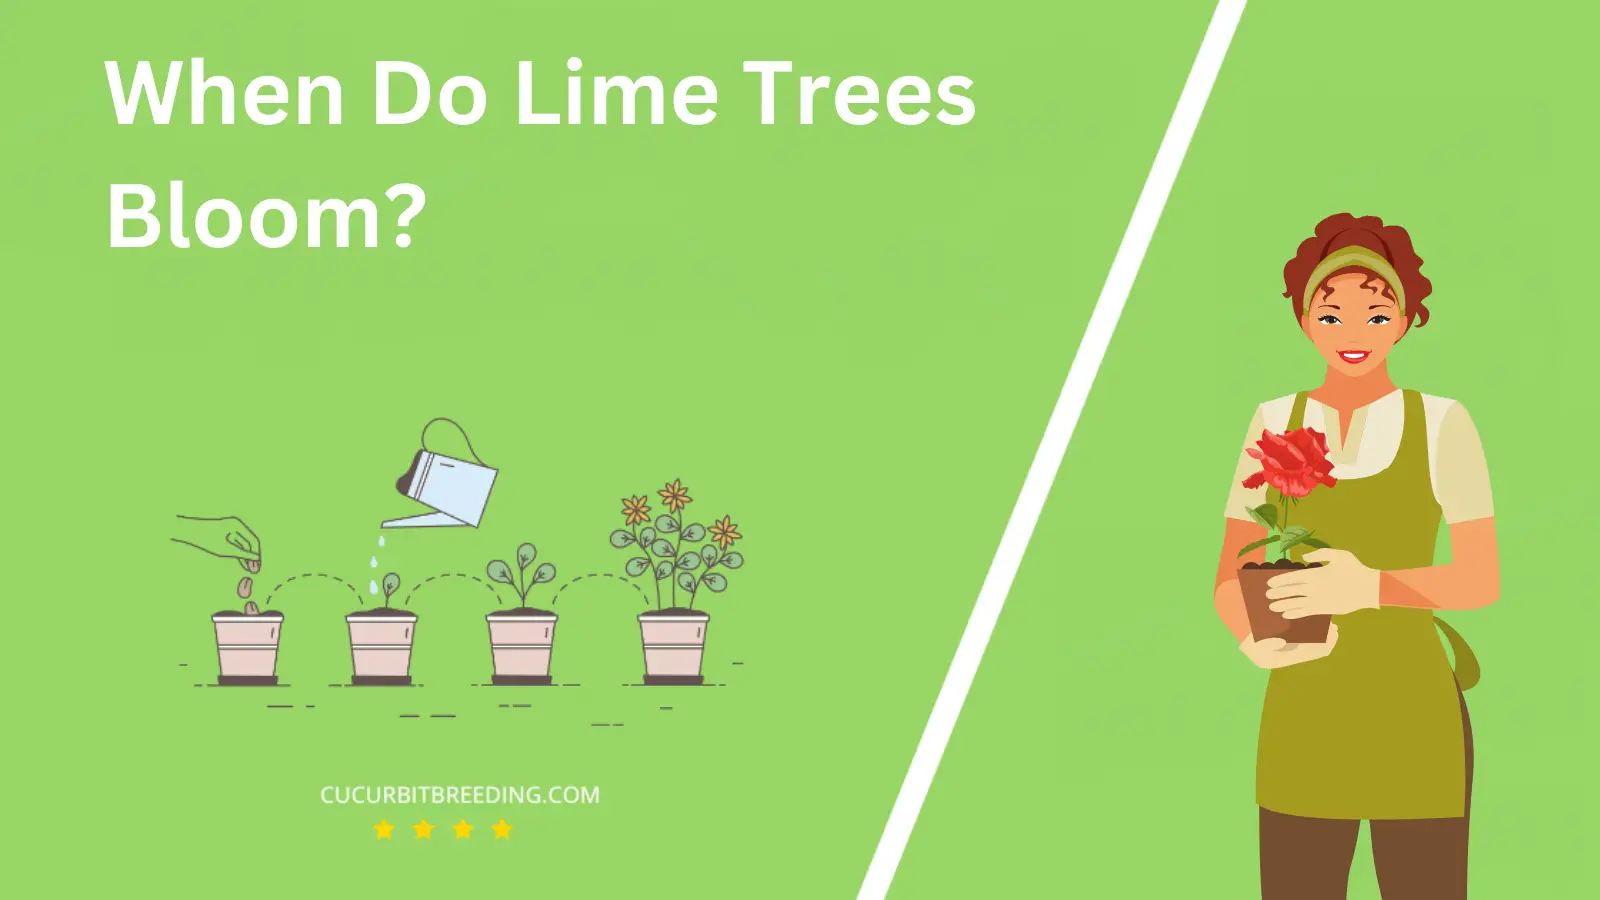 When Do Lime Trees Bloom?